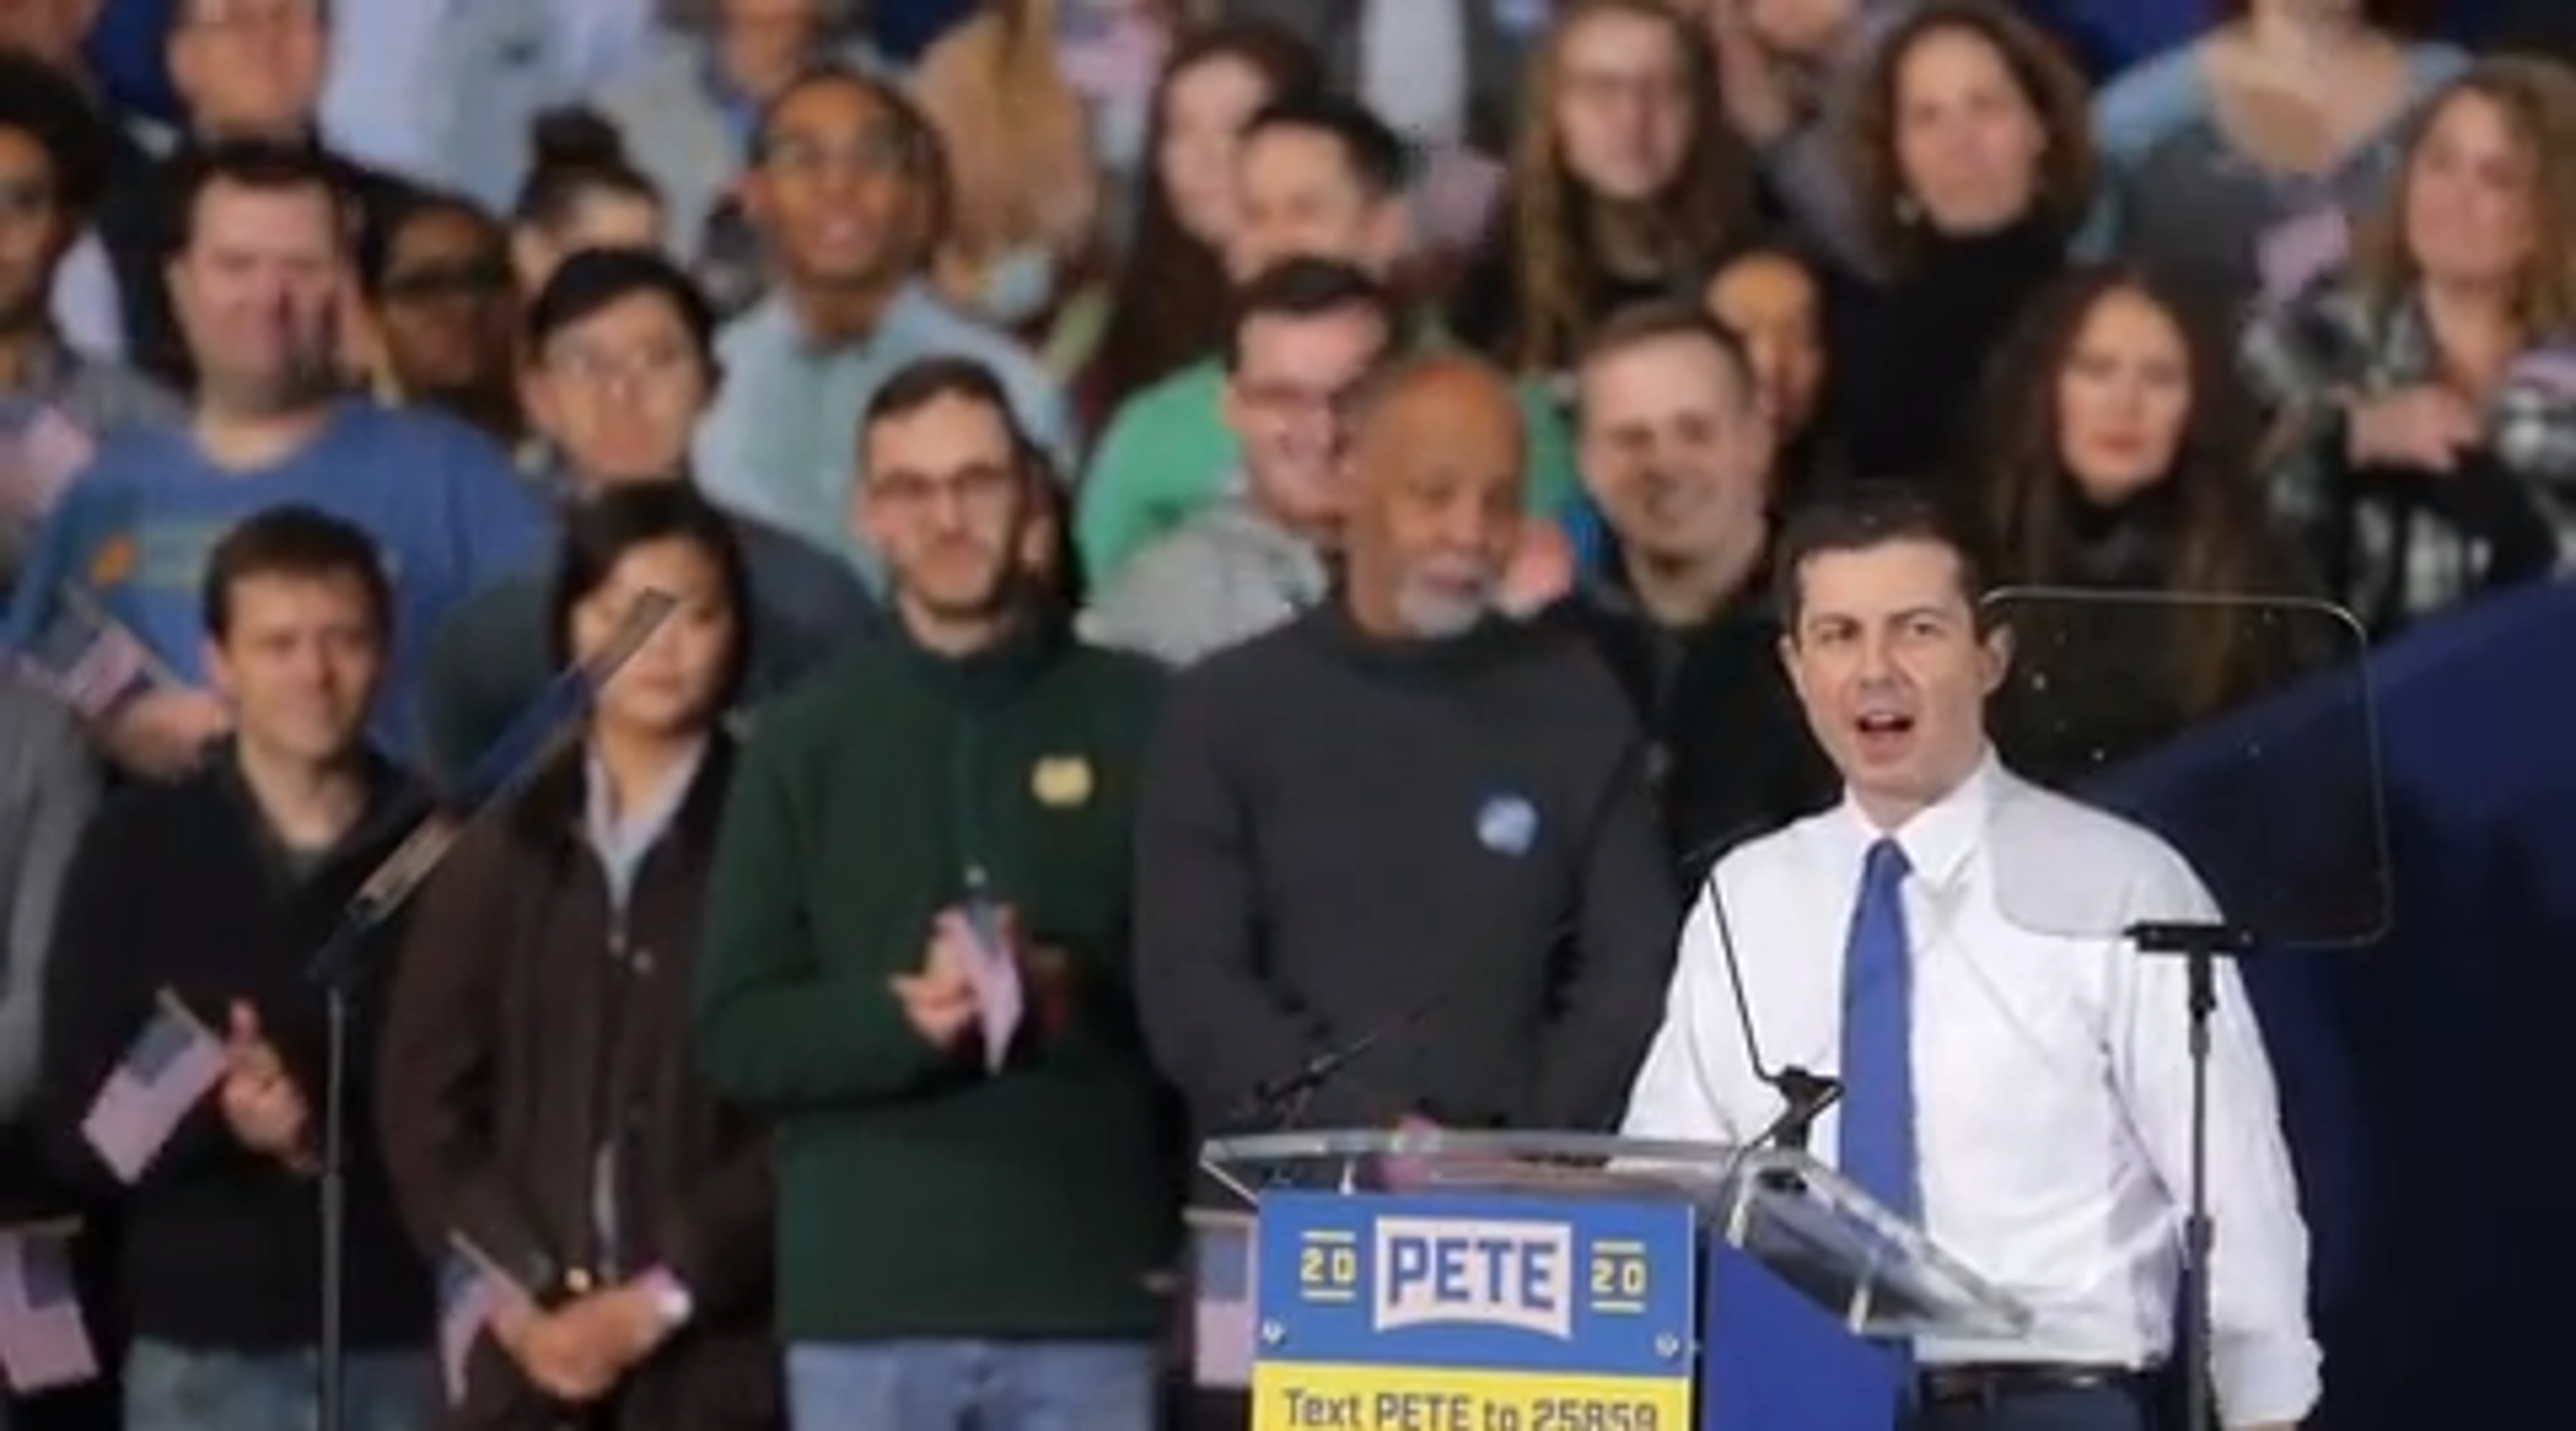 2020 presidential candidate Pete Buttigieg: Notable Hollywood donors3025 x 1680